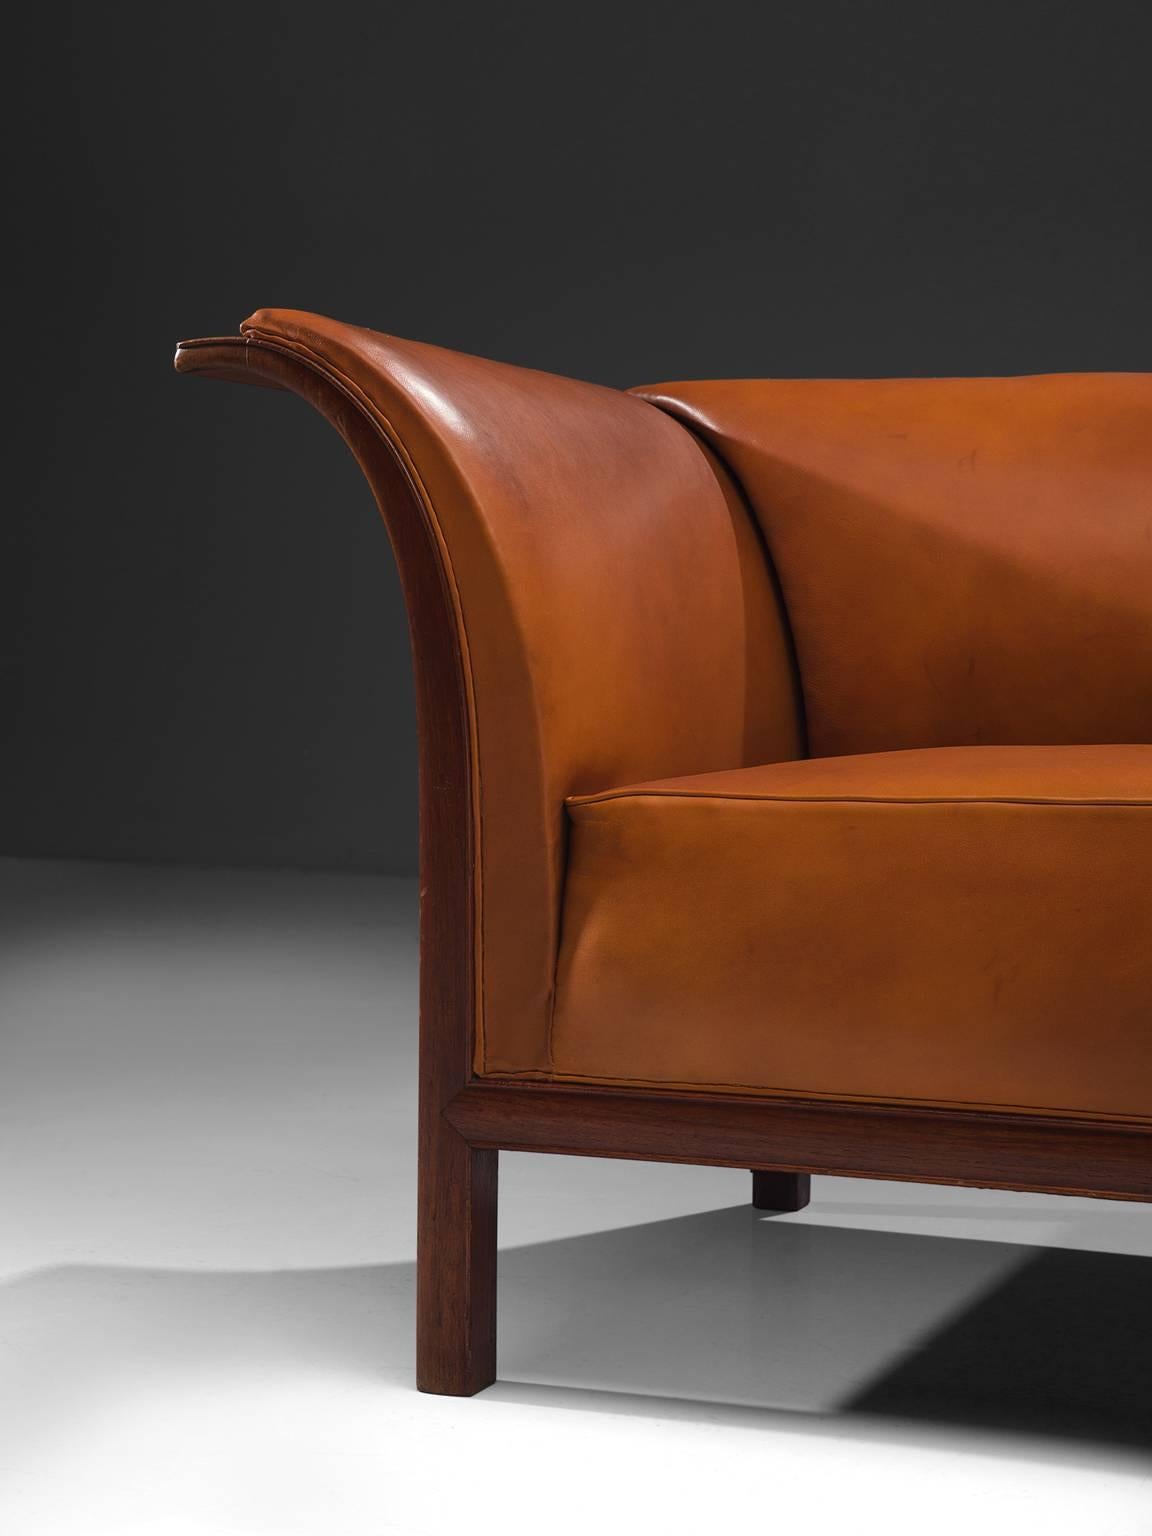 Patinated Frits Henningsen Sofa in Teak and Cognac Leather, circa 1930